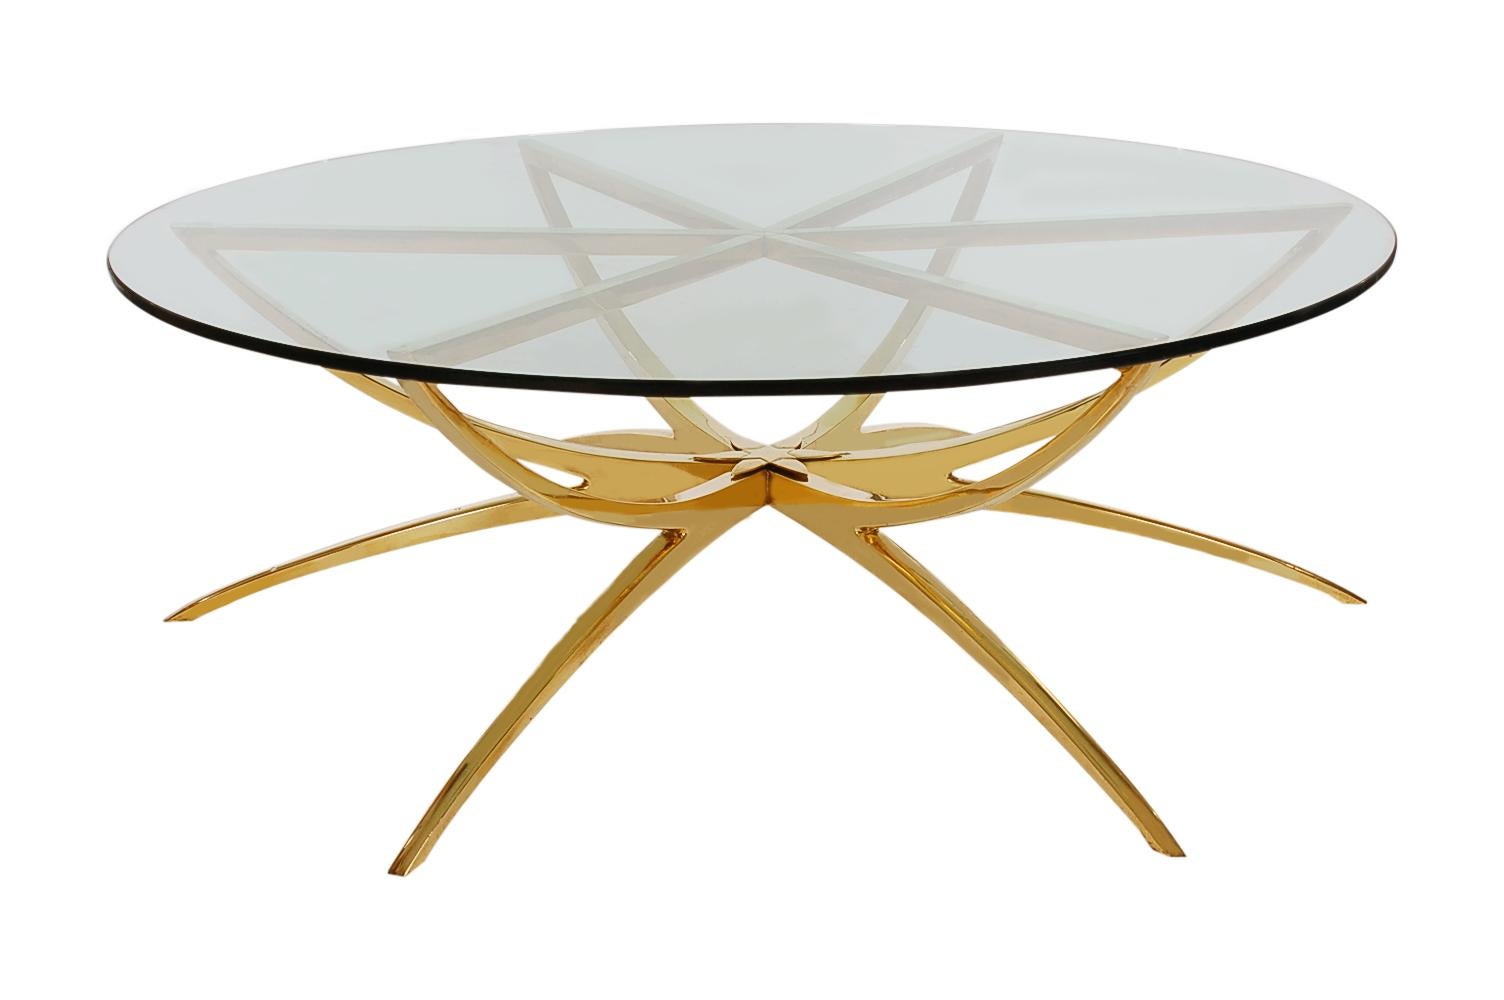 Solid Brass Midcentury Italian Modern Round Glass Top Spider Cocktail Table In Excellent Condition For Sale In Philadelphia, PA